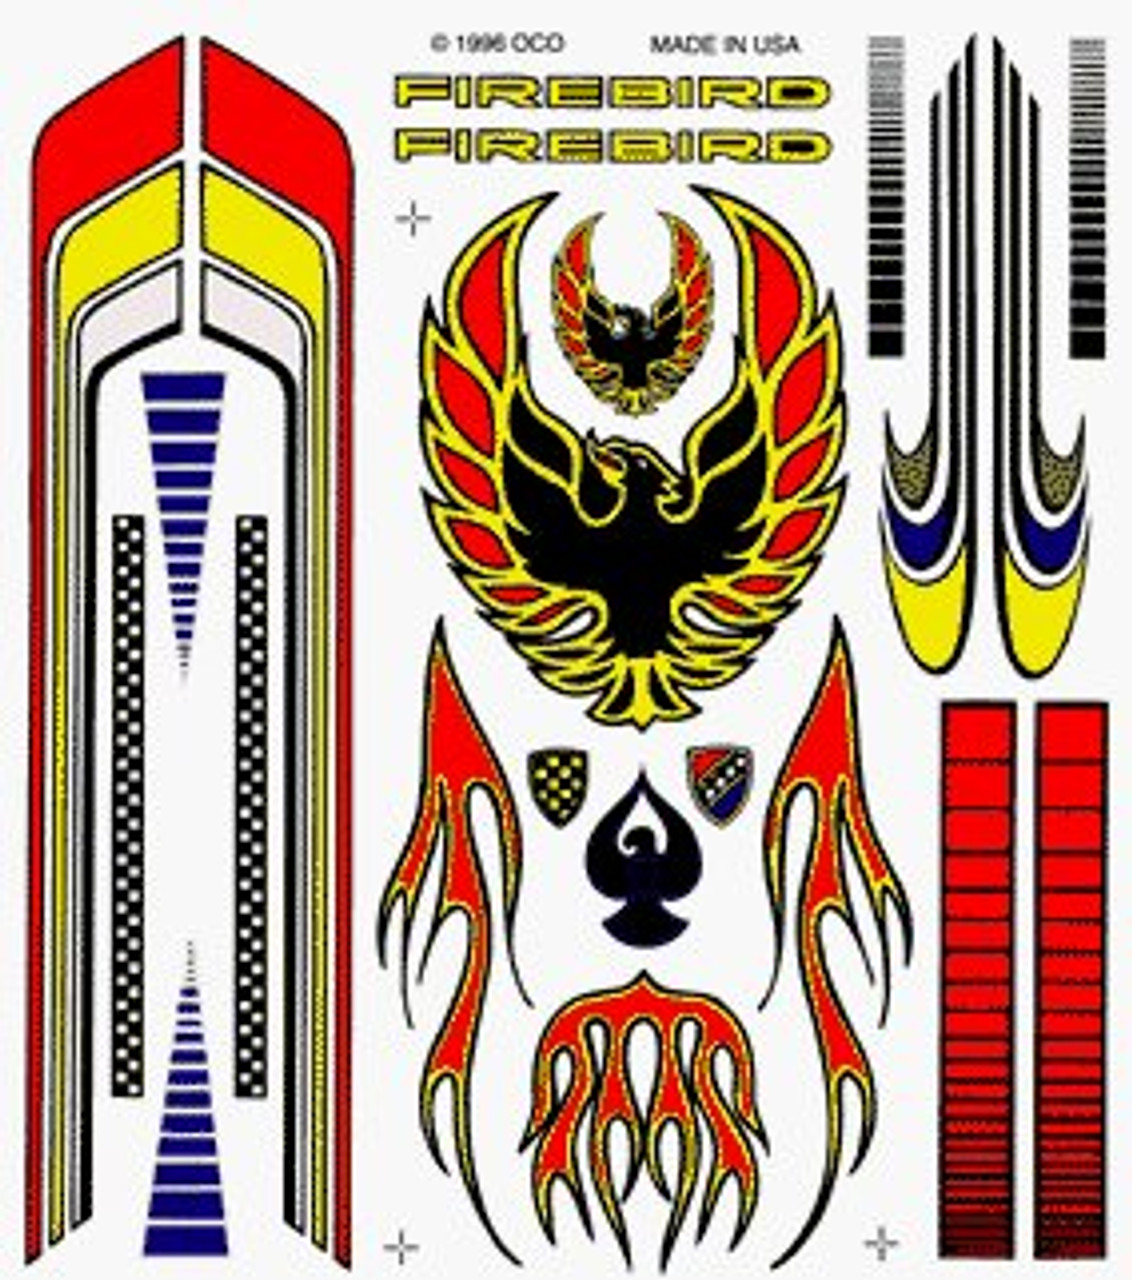 Pinewood Derby Flames Decal